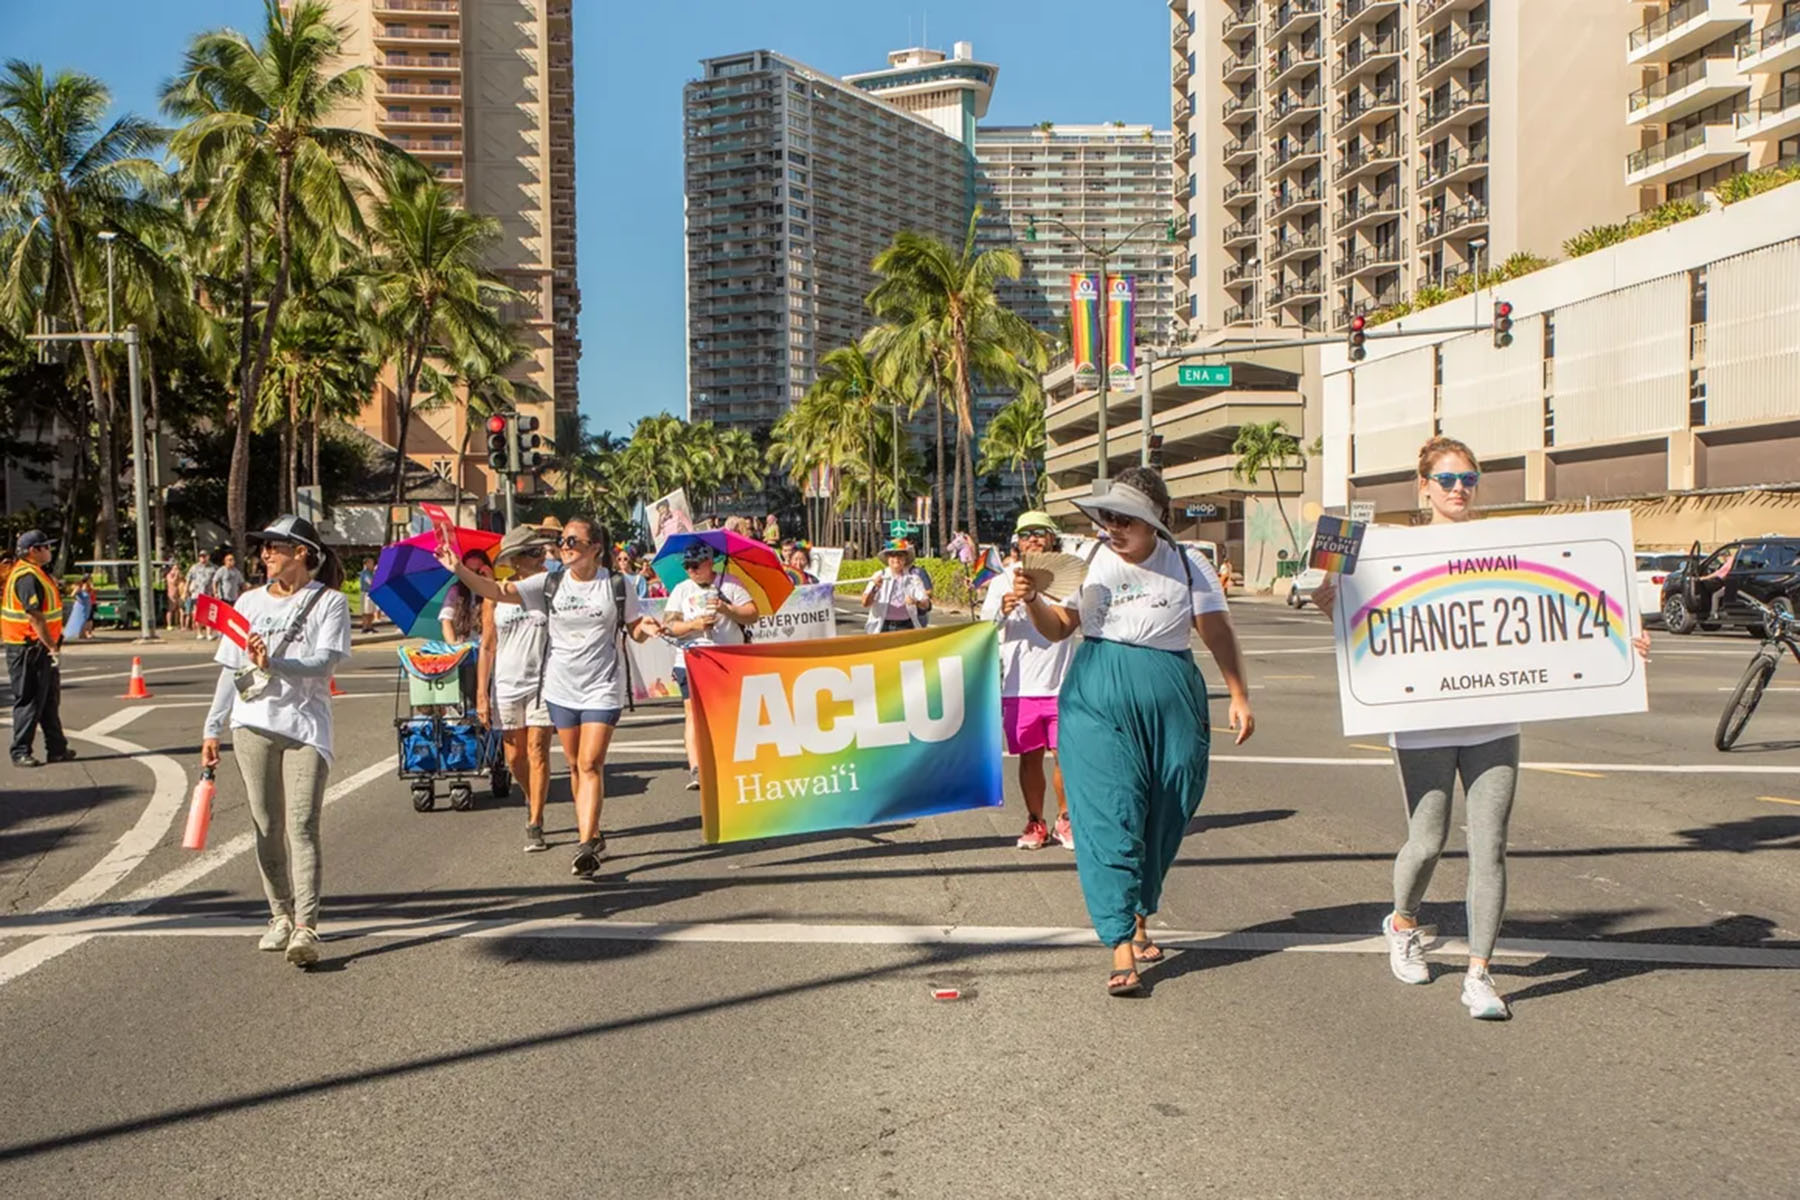 People walk down the streets holding signs for ACLU Hawaii and one that reads "Change 23 in 24" during Hawaii Pride.